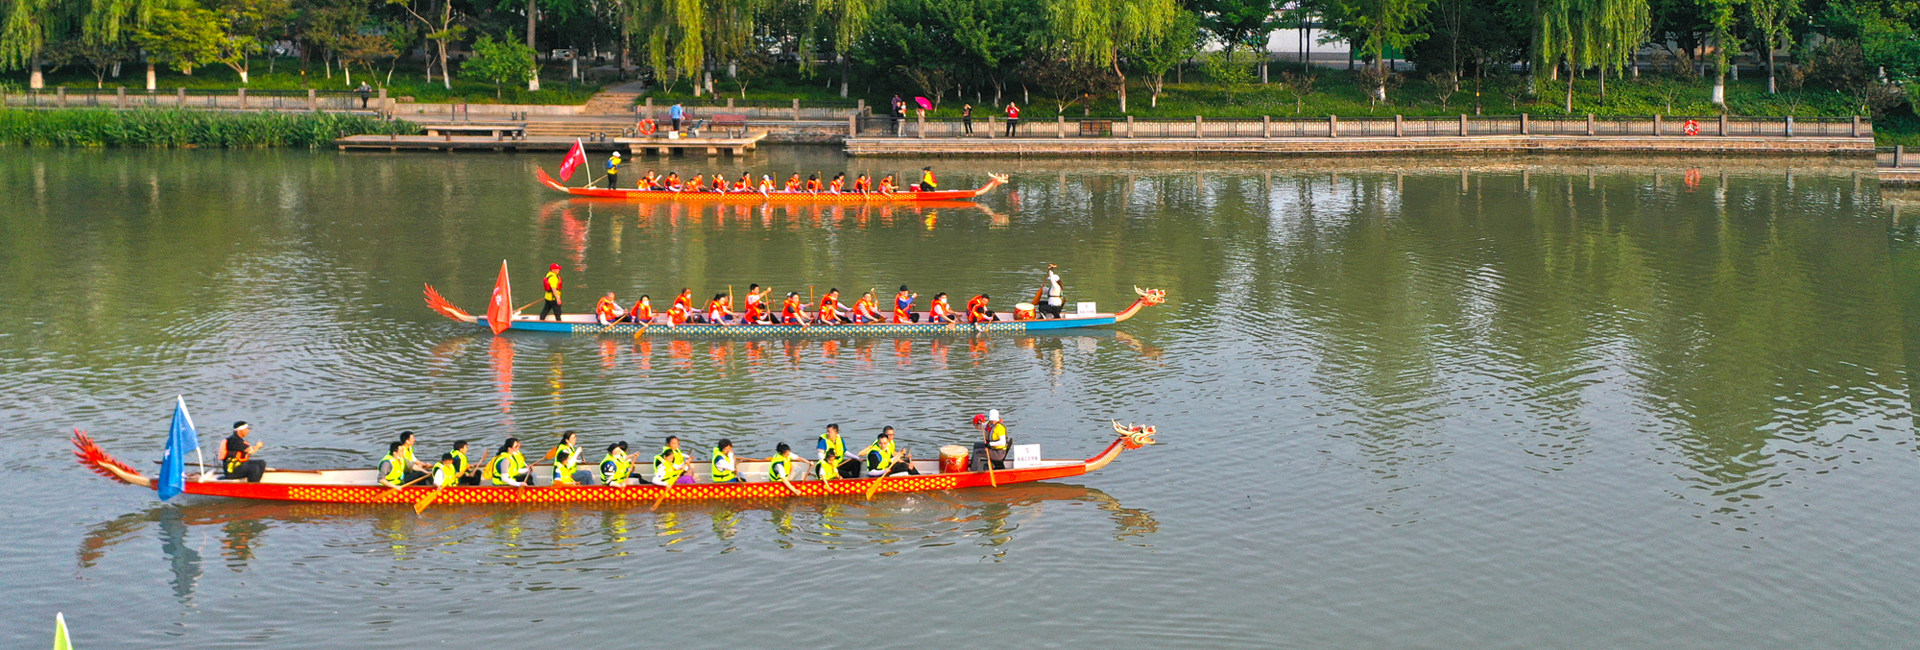 Exciting parent-child dragon boat race held on Haohe River